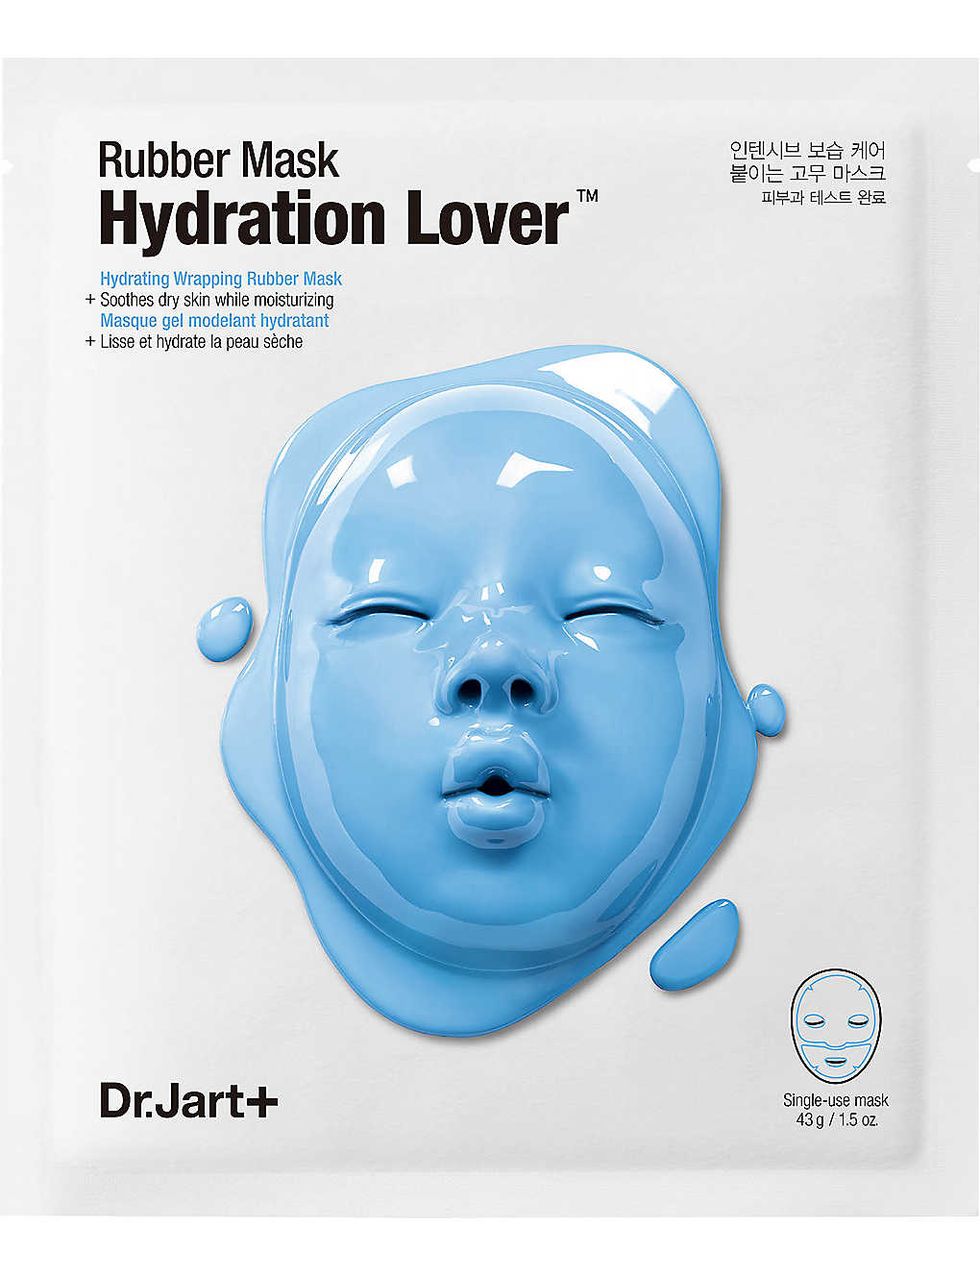 Rubber Mask Hydration Lover